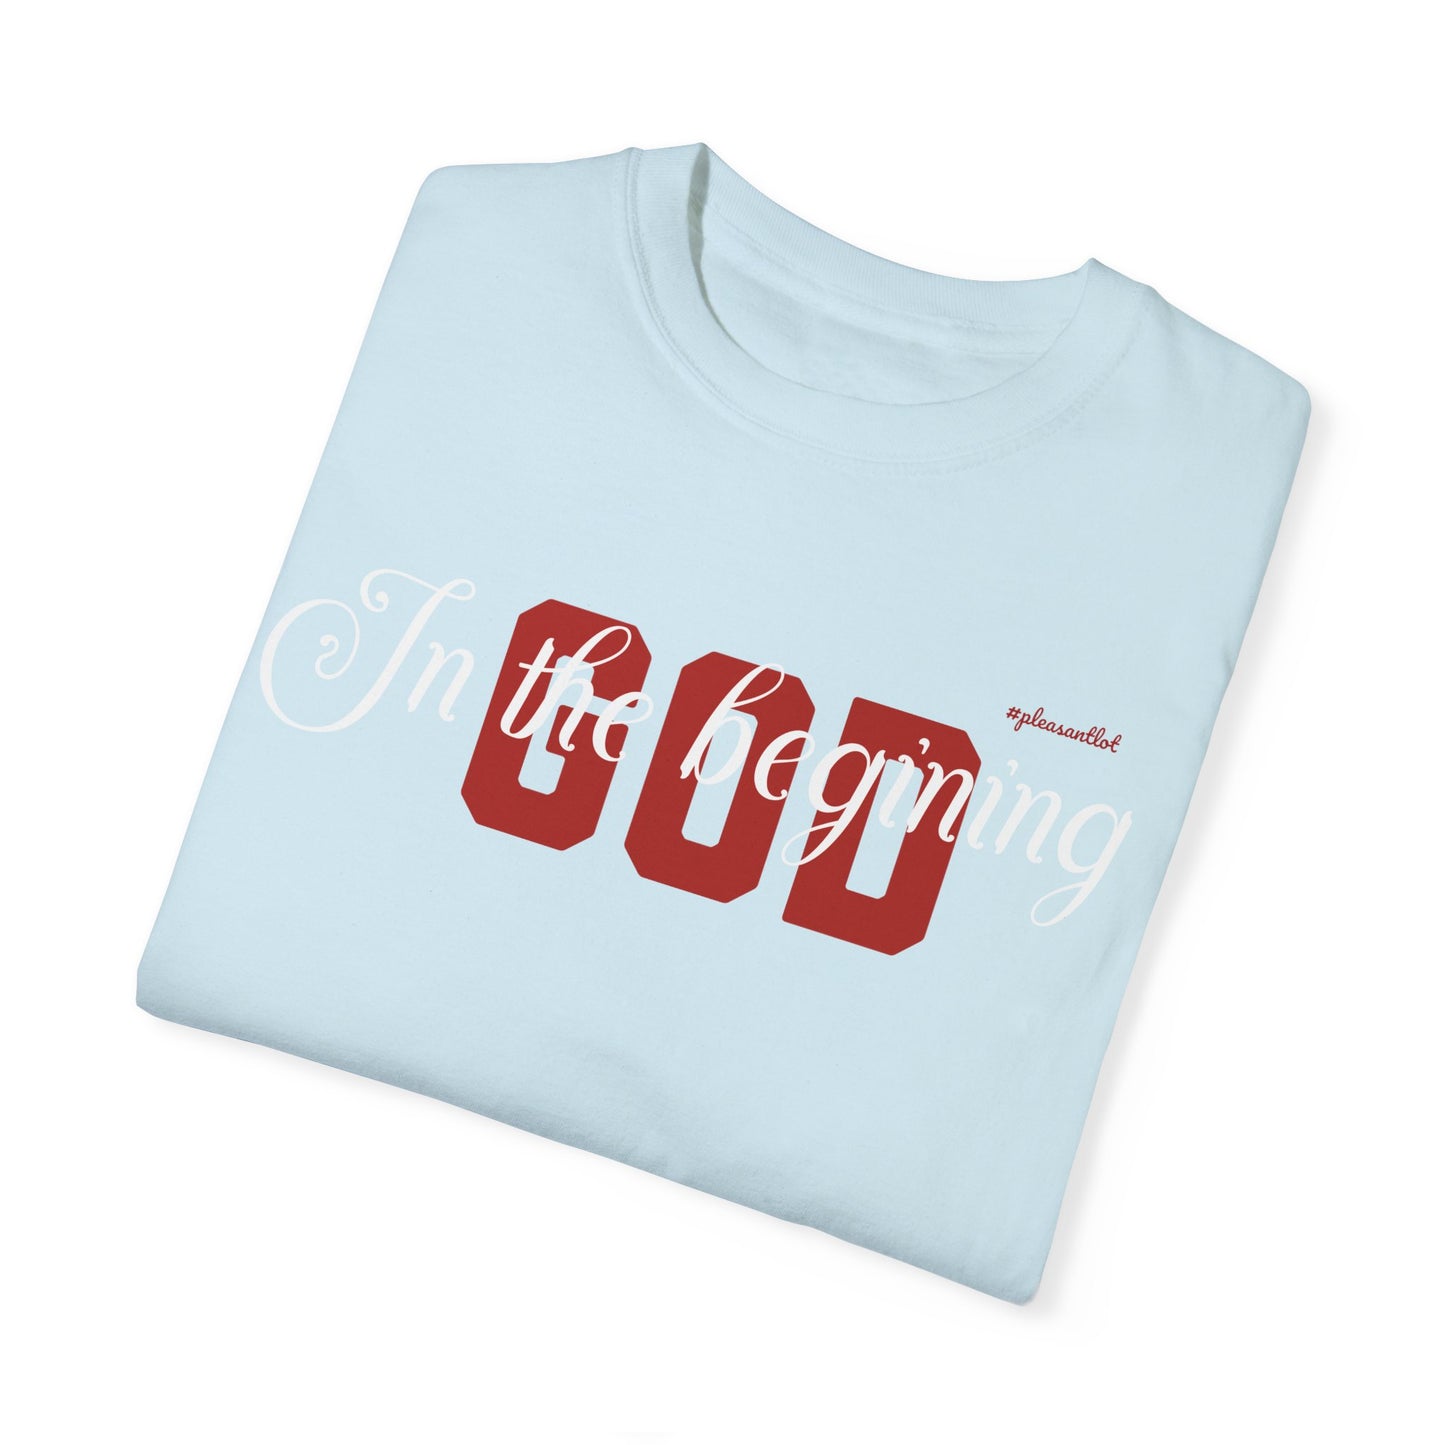 Unisex Garment-Dyed T-shirt(In The Begining, God)